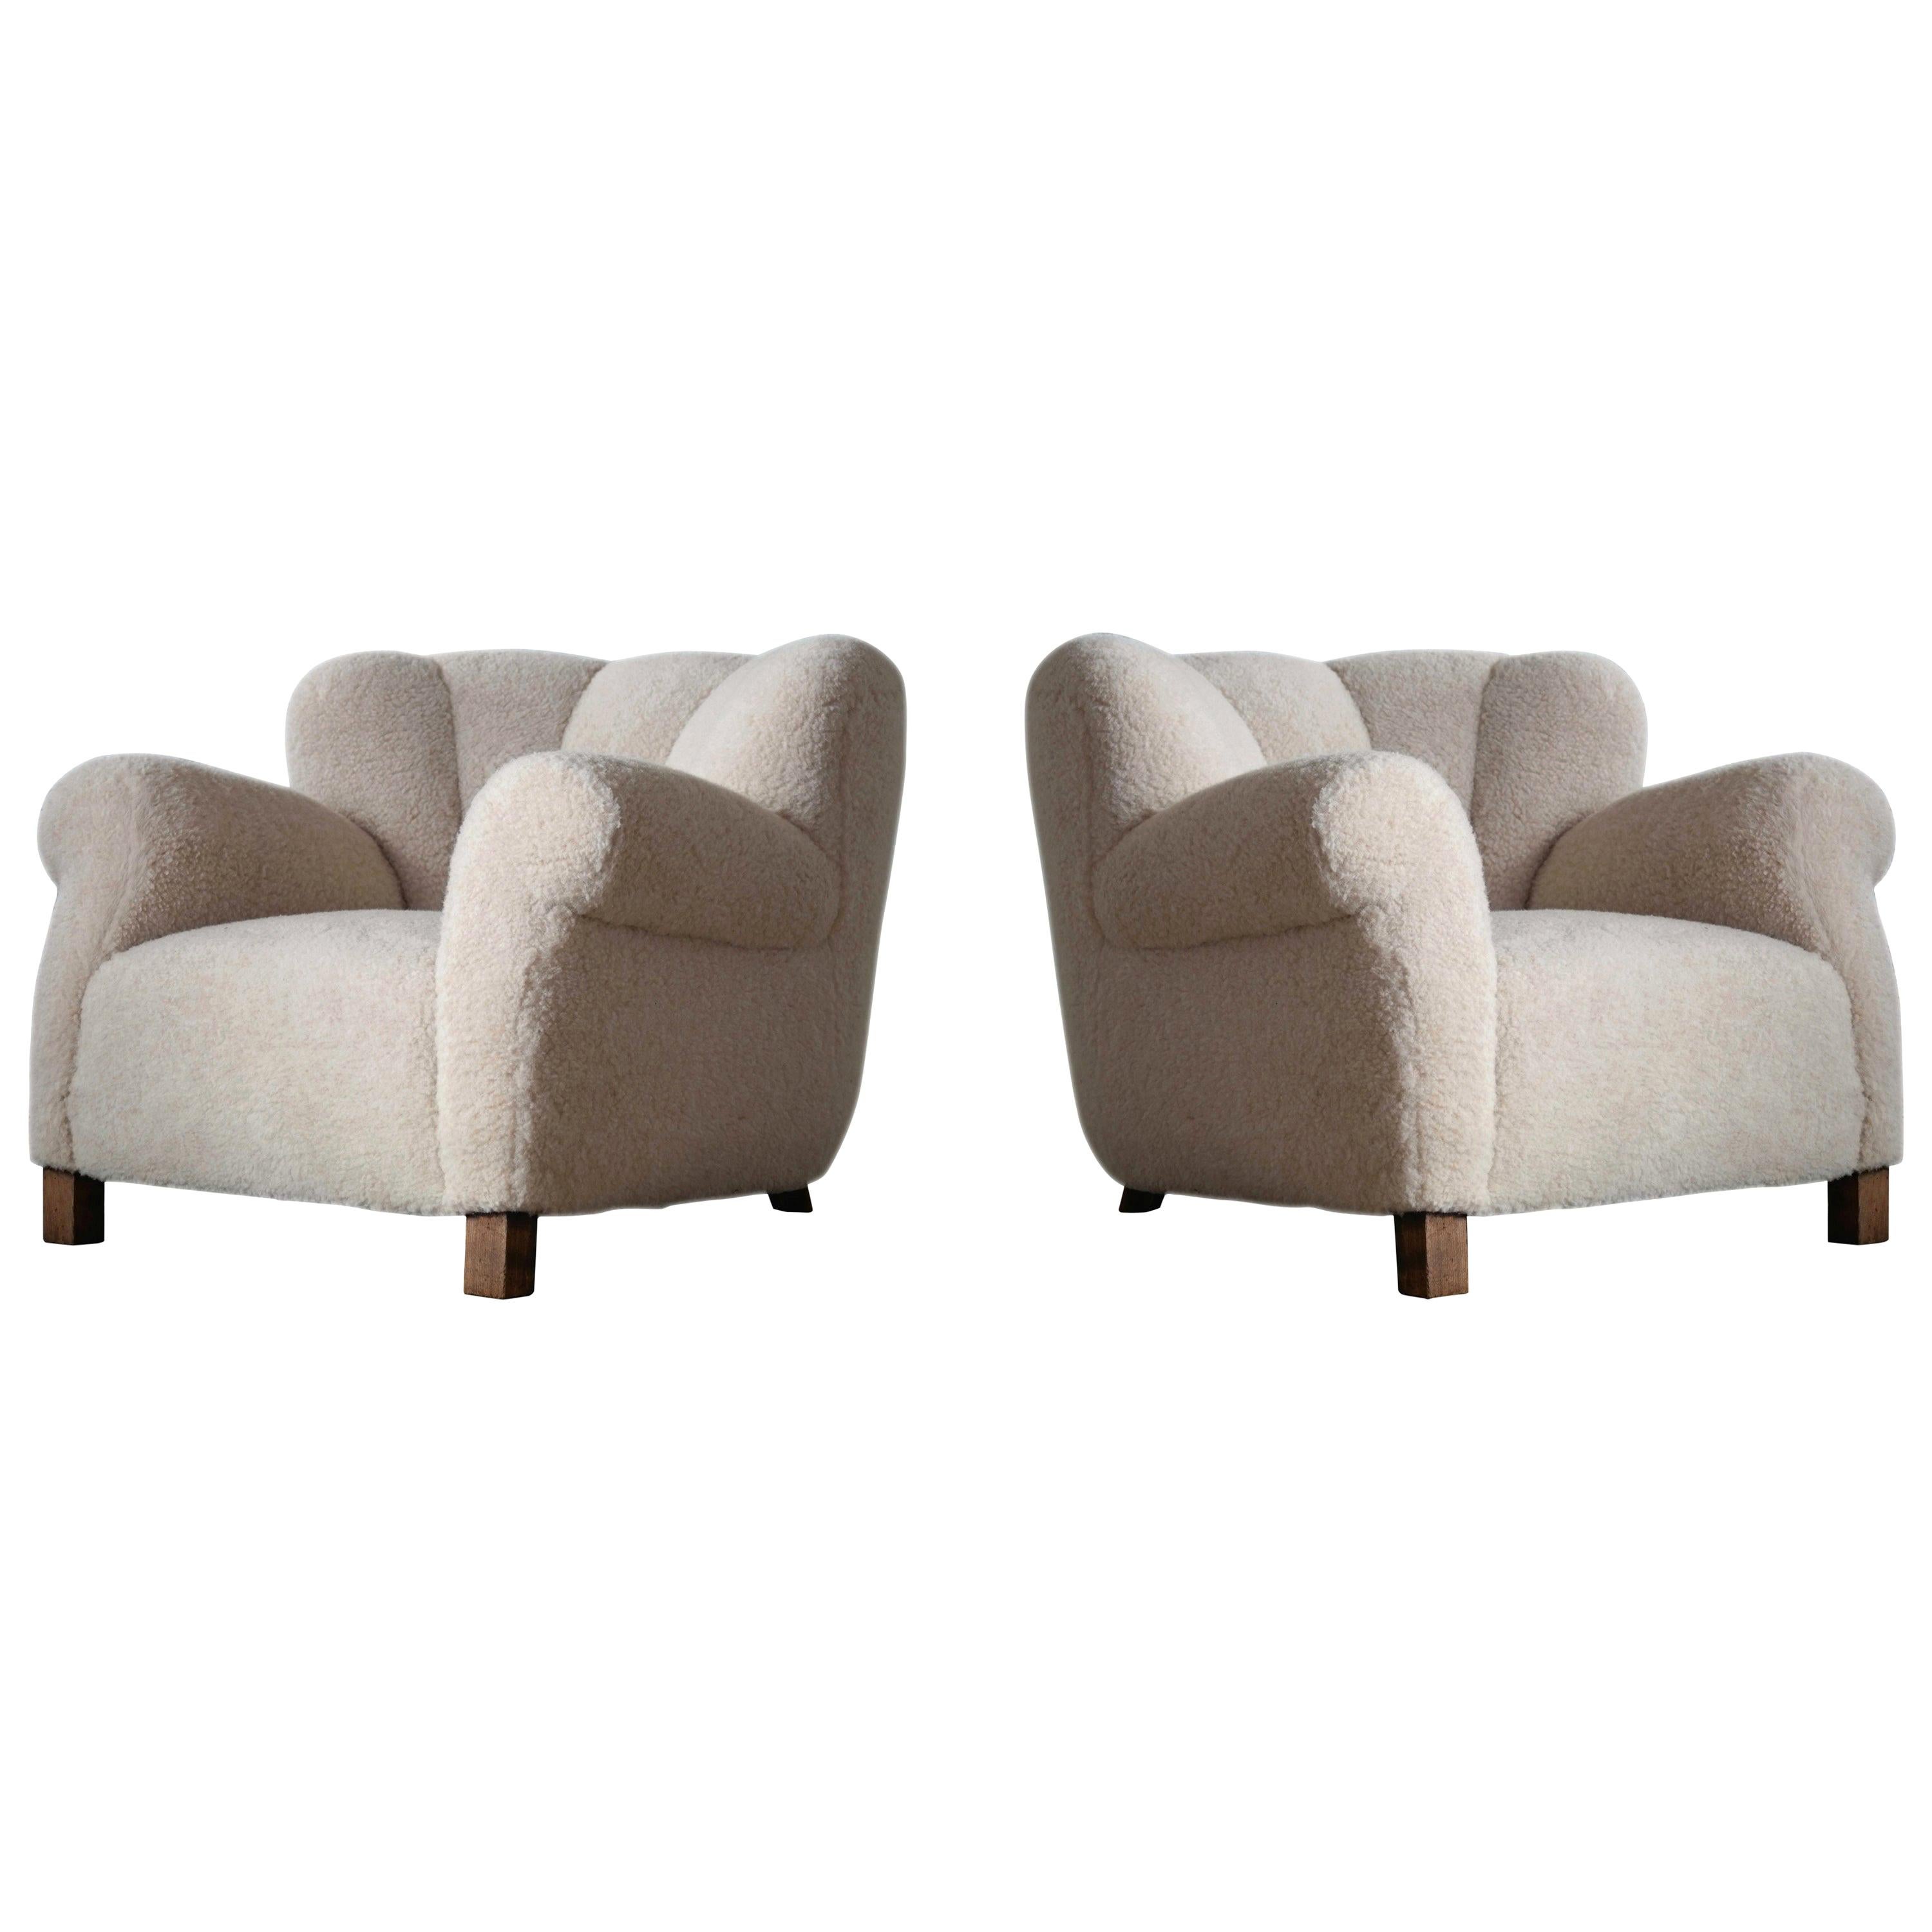 Pair of Danish Fritz Hansen Model 1518 Large Size Club Chair in Lambswool, 1940s